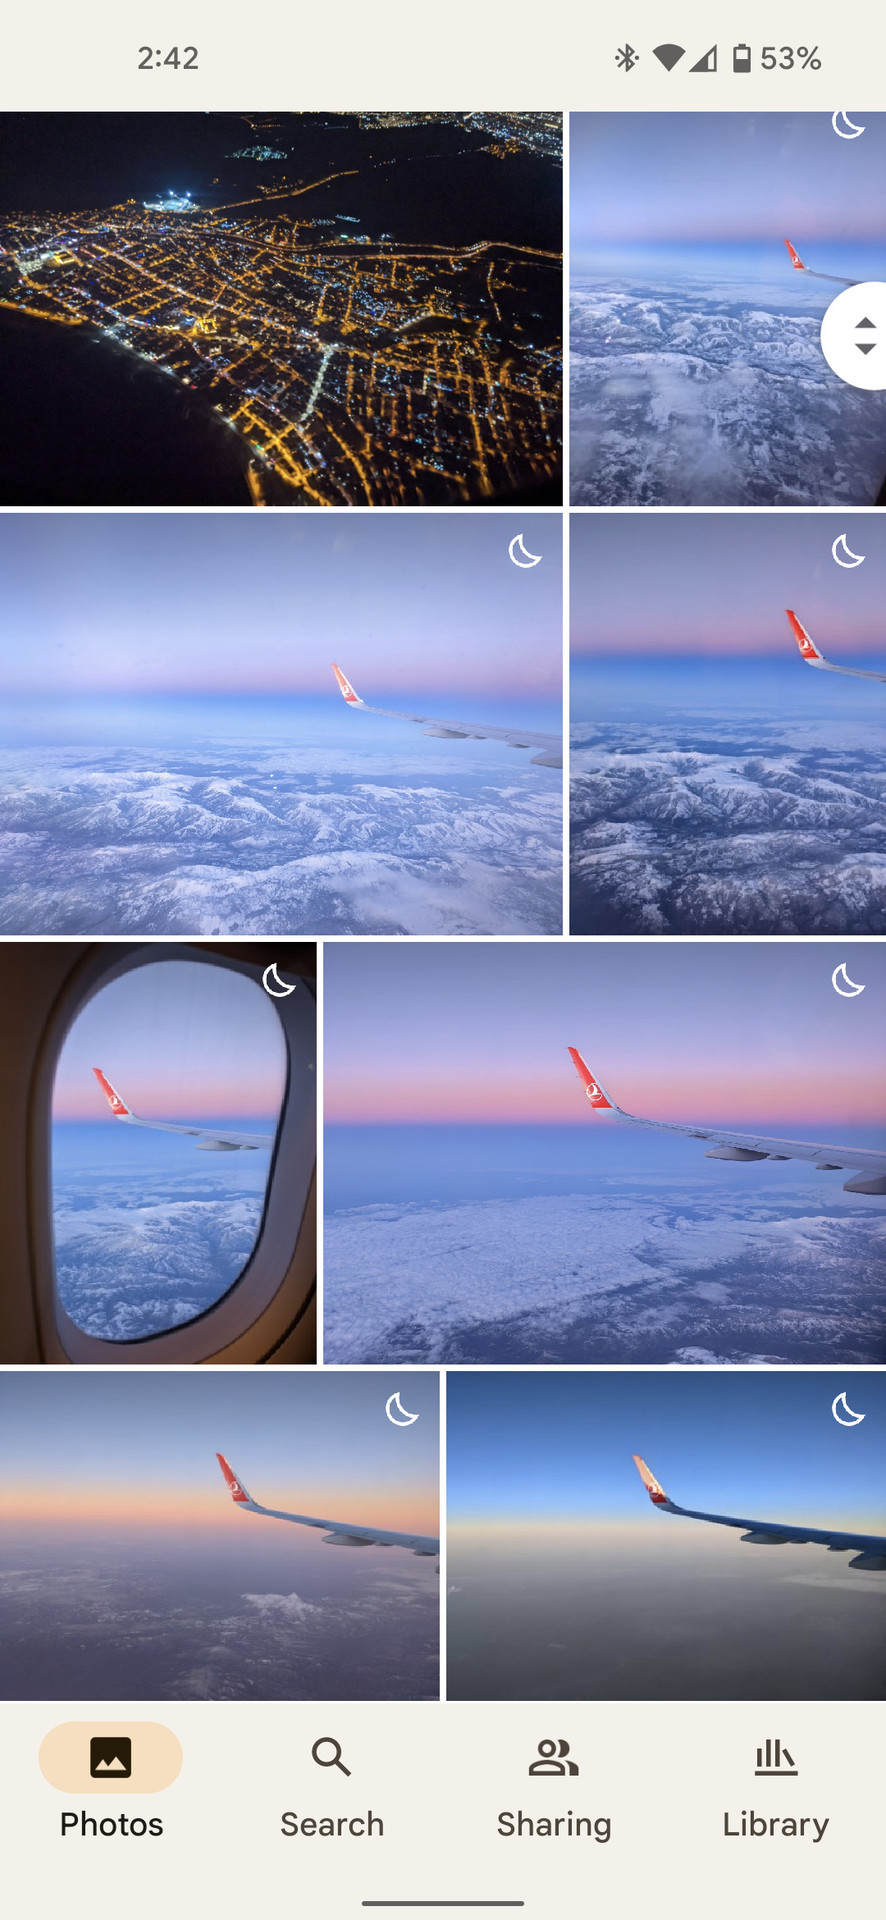 Google Photos grid with large thumbnails of pics taken from a plane